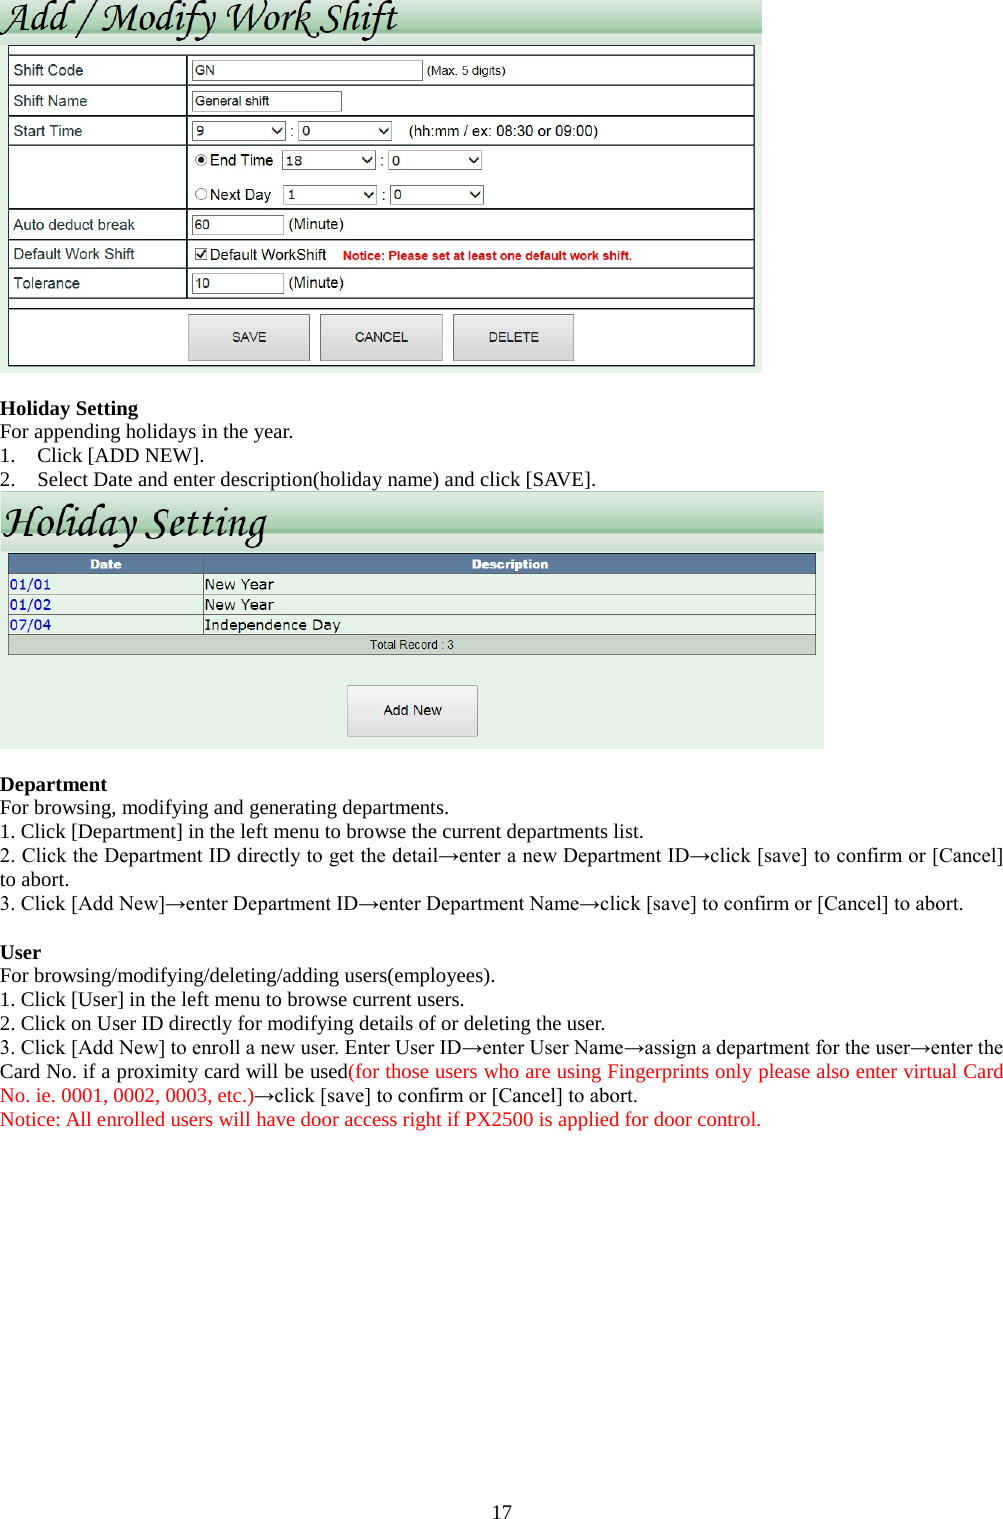  17   Holiday Setting For appending holidays in the year.   1. Click [ADD NEW]. 2. Select Date and enter description(holiday name) and click [SAVE].   Department For browsing, modifying and generating departments. 1. Click [Department] in the left menu to browse the current departments list.   2. Click the Department ID directly to get the detail→enter a new Department ID→click [save] to confirm or [Cancel] to abort. 3. Click [Add New]→enter Department ID→enter Department Name→click [save] to confirm or [Cancel] to abort.  User For browsing/modifying/deleting/adding users(employees). 1. Click [User] in the left menu to browse current users. 2. Click on User ID directly for modifying details of or deleting the user. 3. Click [Add New] to enroll a new user. Enter User ID→enter User Name→assign a department for the user→enter the Card No. if a proximity card will be used(for those users who are using Fingerprints only please also enter virtual Card No. ie. 0001, 0002, 0003, etc.)→click [save] to confirm or [Cancel] to abort. Notice: All enrolled users will have door access right if PX2500 is applied for door control. 